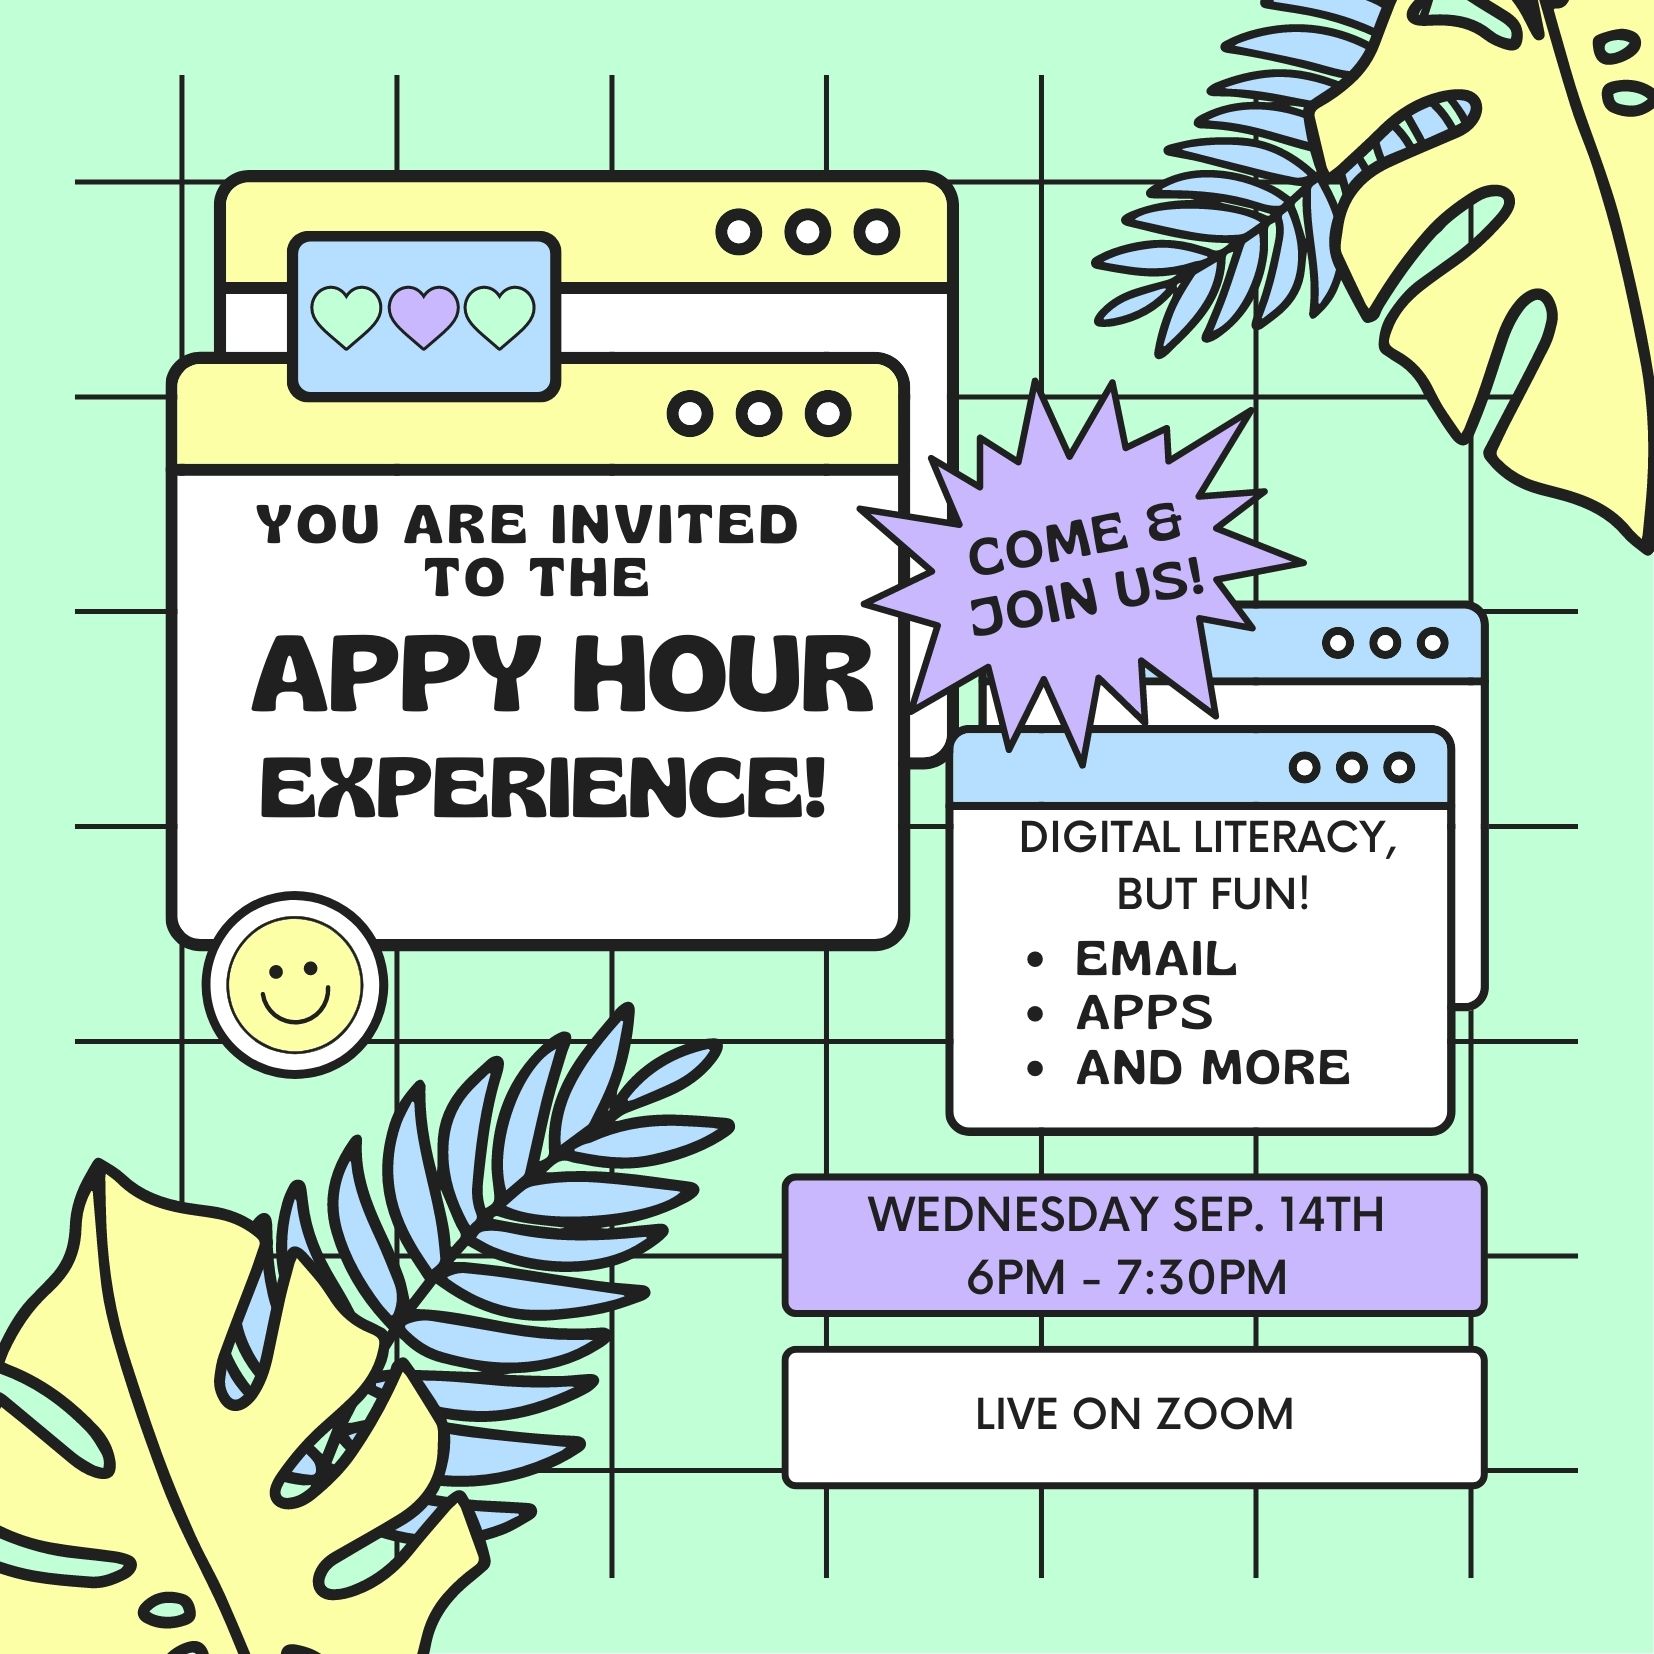 You are invited to the Appy Hour Experience. Come and Join us! Digital literacy fun fun: email, apps and more. Wednesday Sept 14 6pm-7:30 pm. Live on Zoom. 